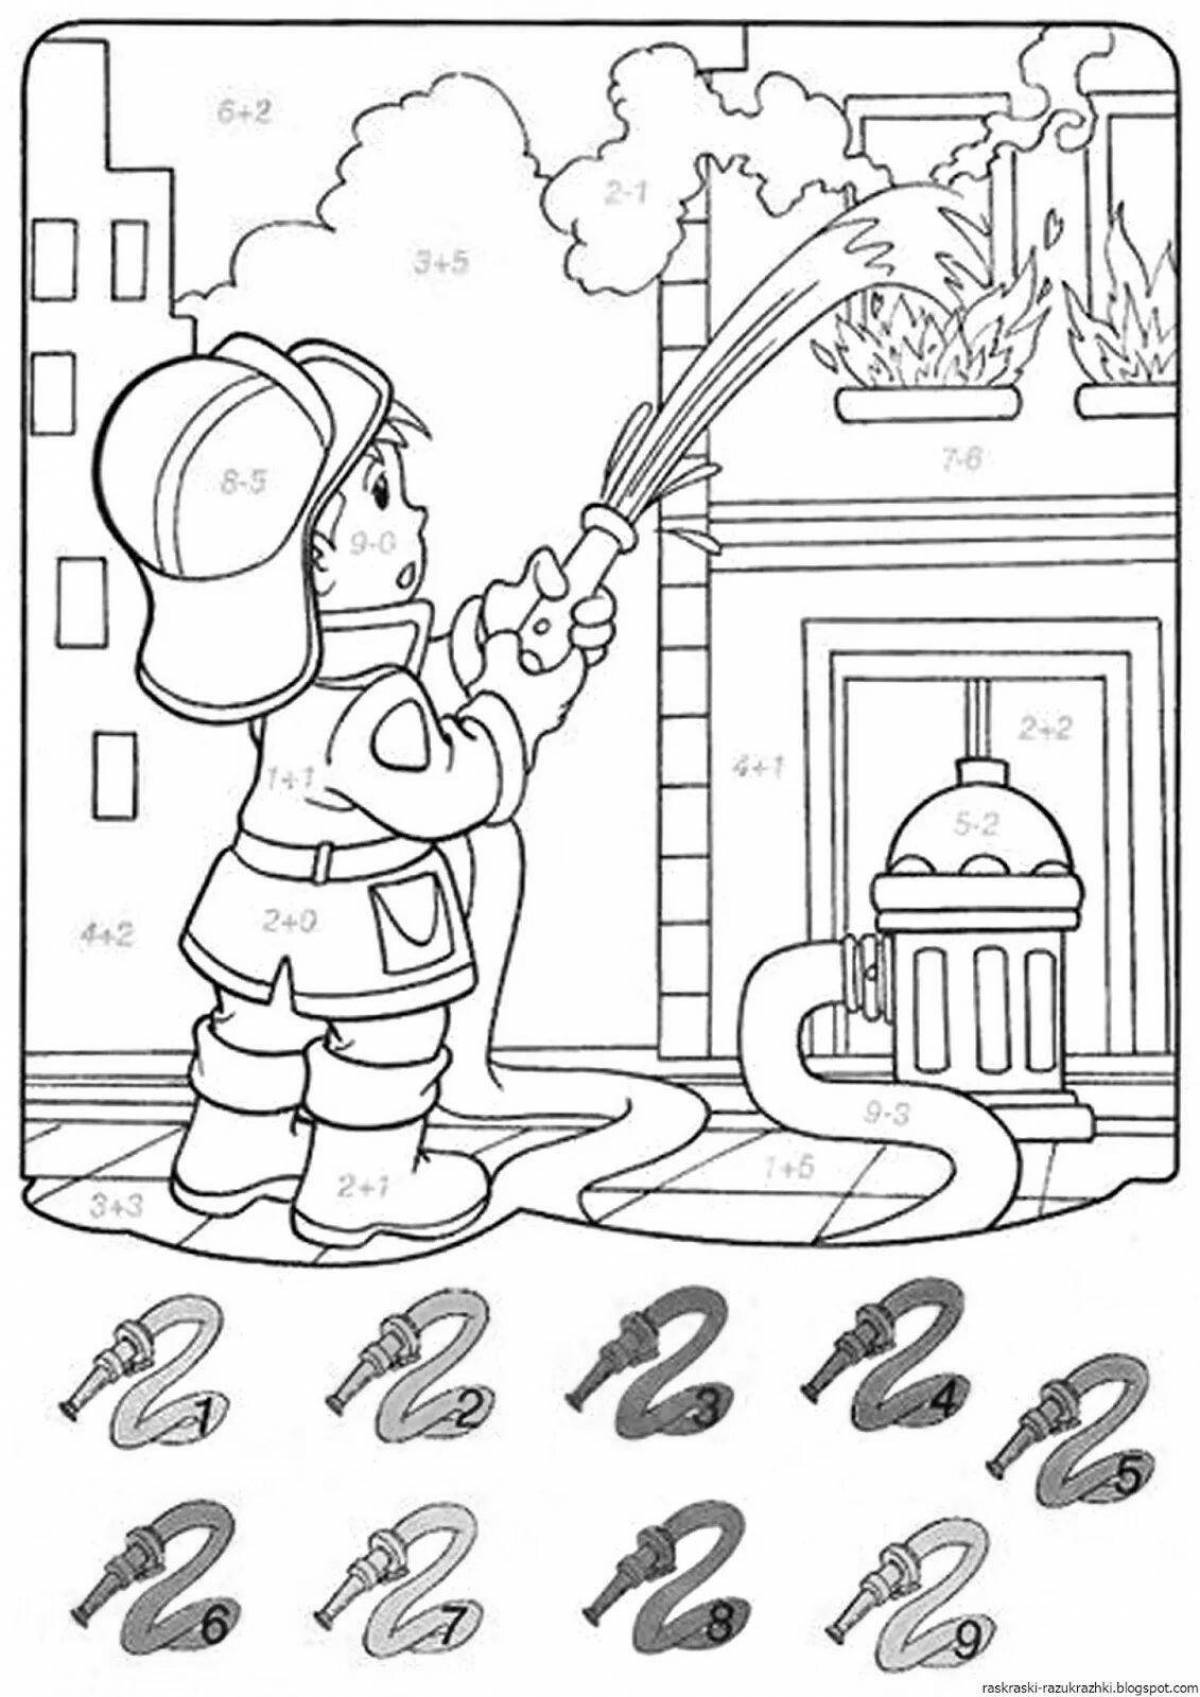 Glitter fire safety coloring book for kindergarten